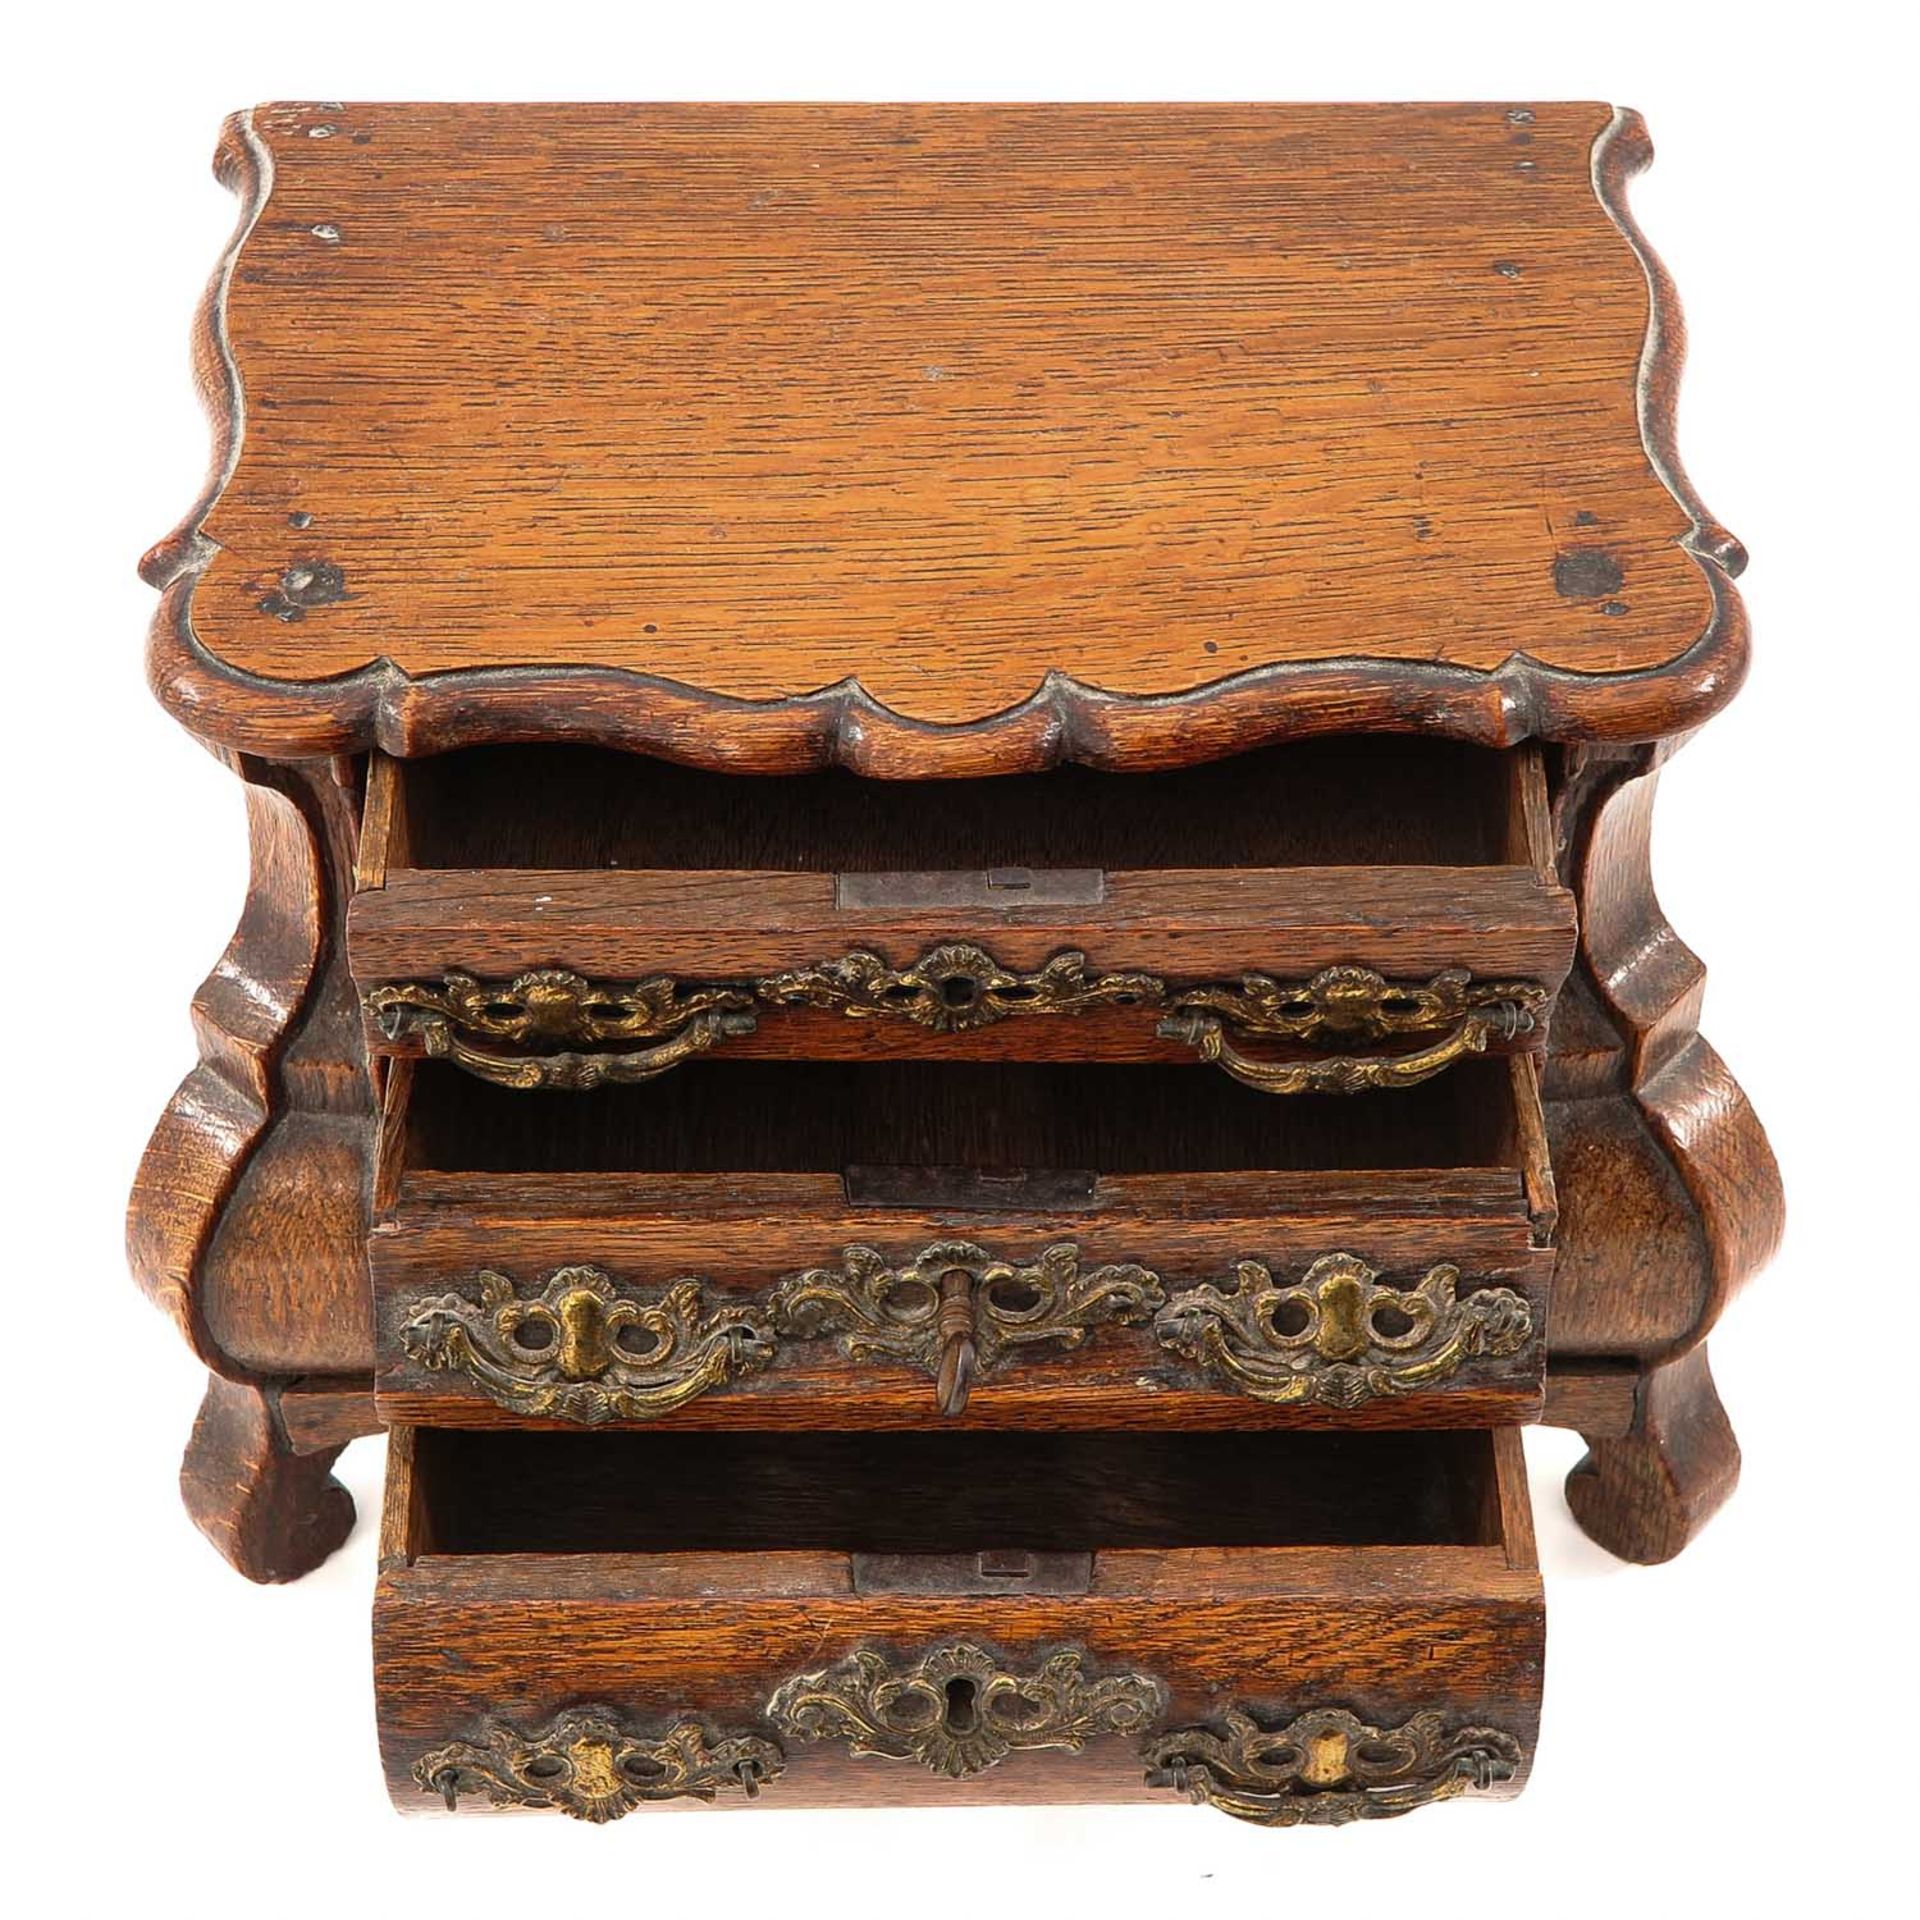 An 18th Century Miniature Cabinet - Image 6 of 7